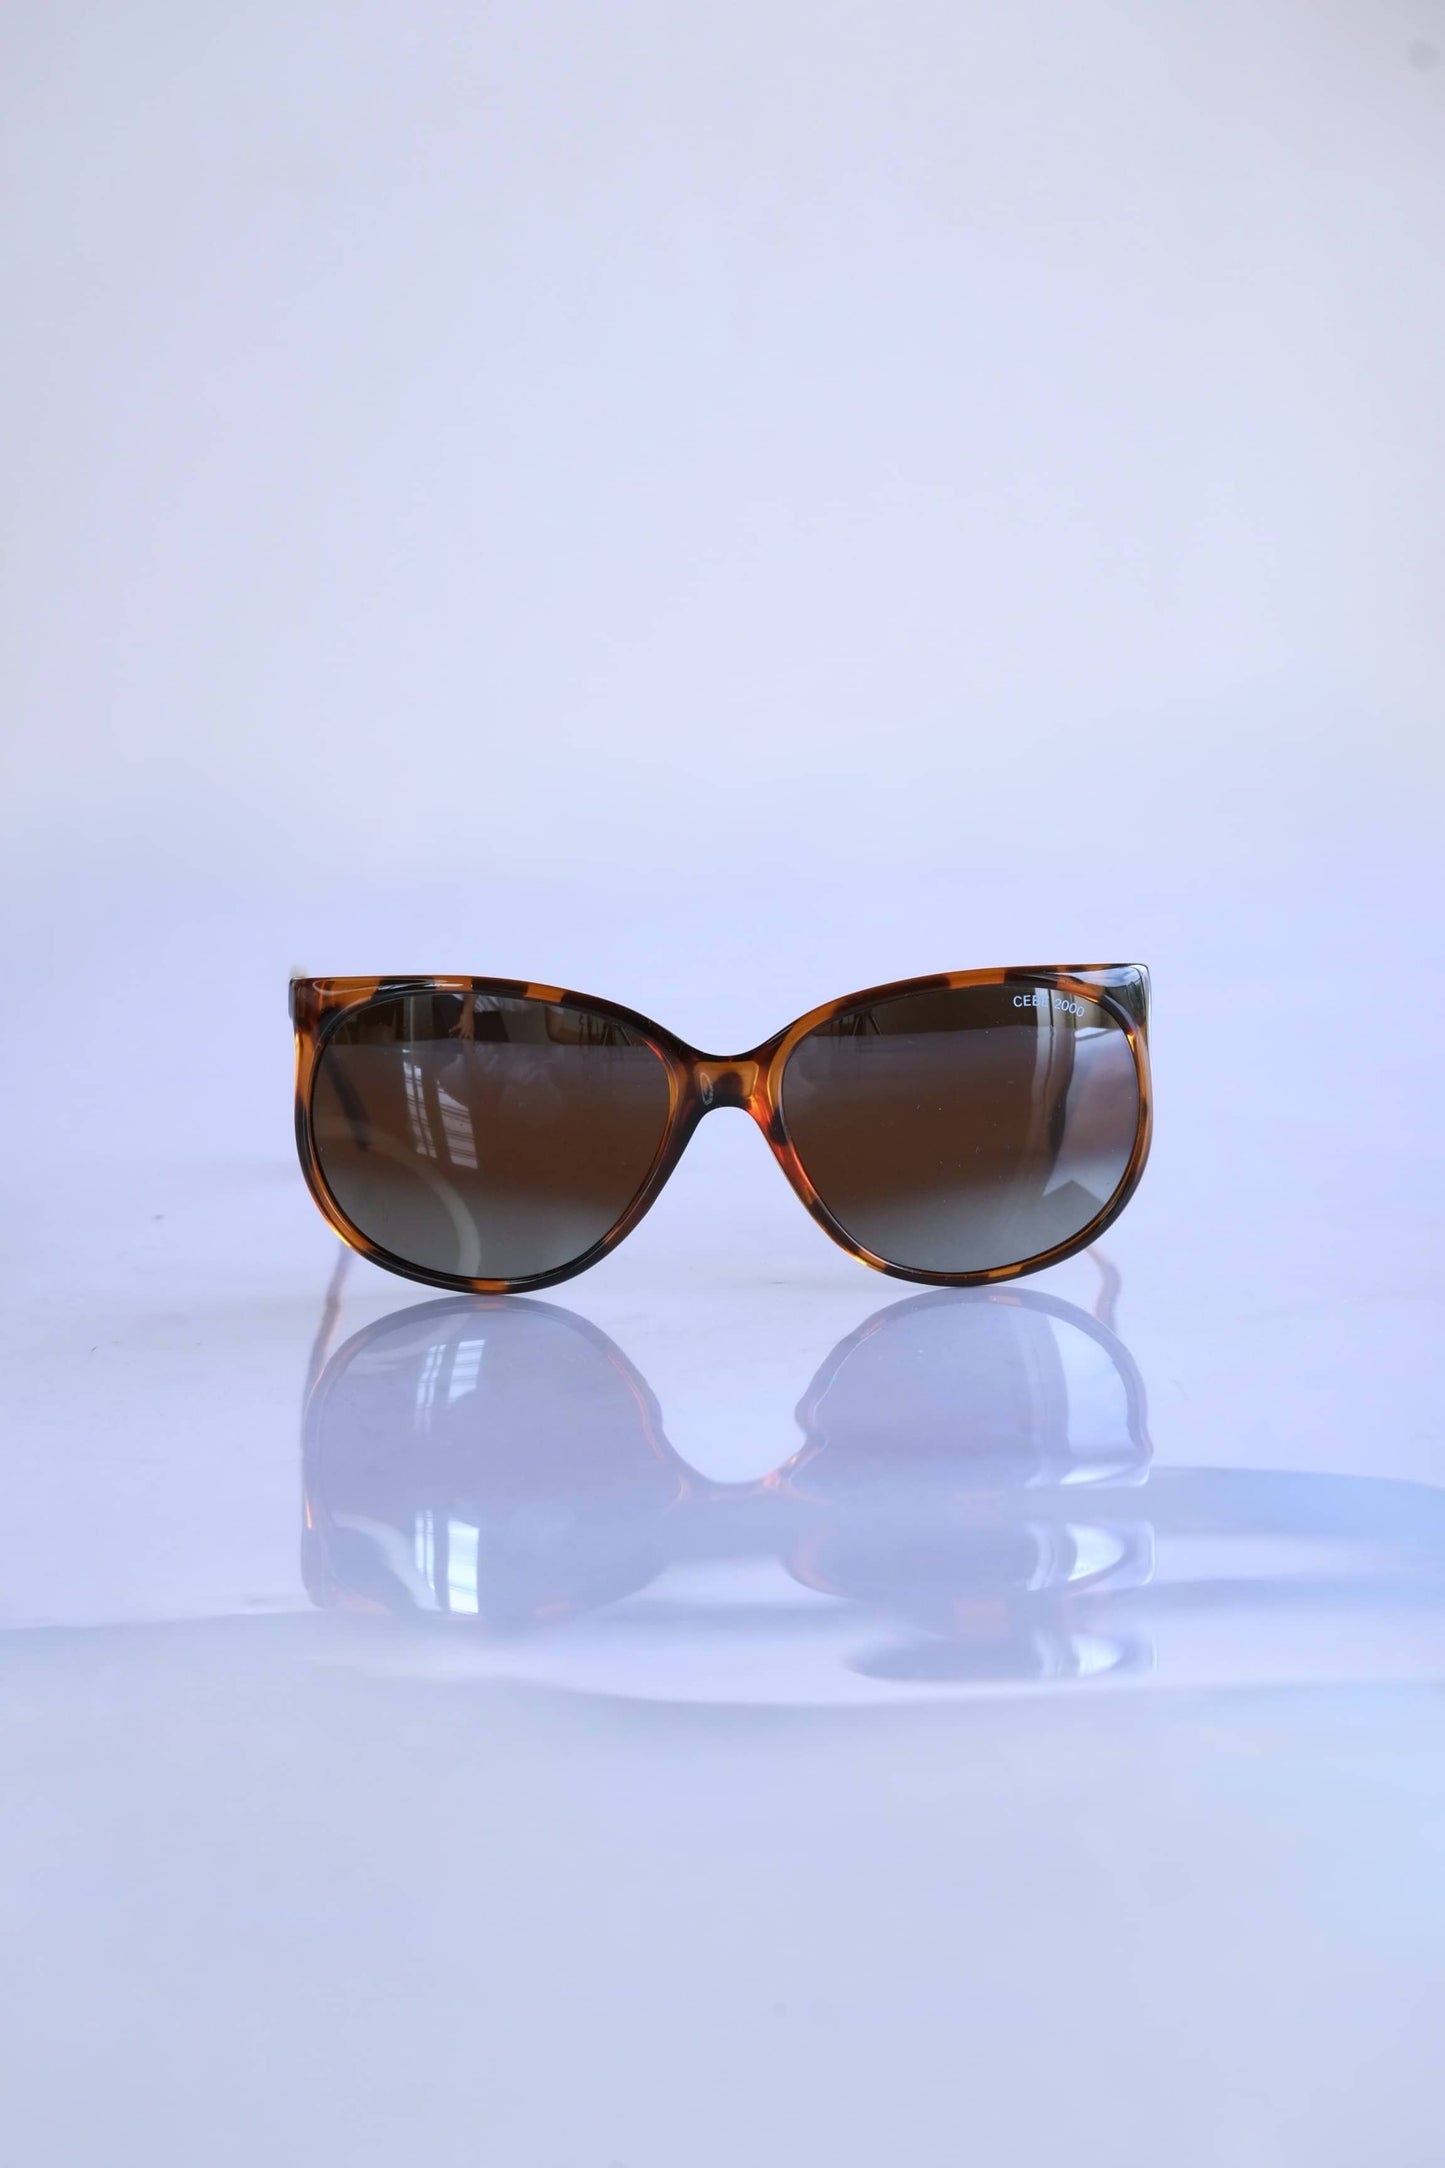 CÉBÉ 90's Classic Mirrored Lens Sunglasses in tortoise on white background